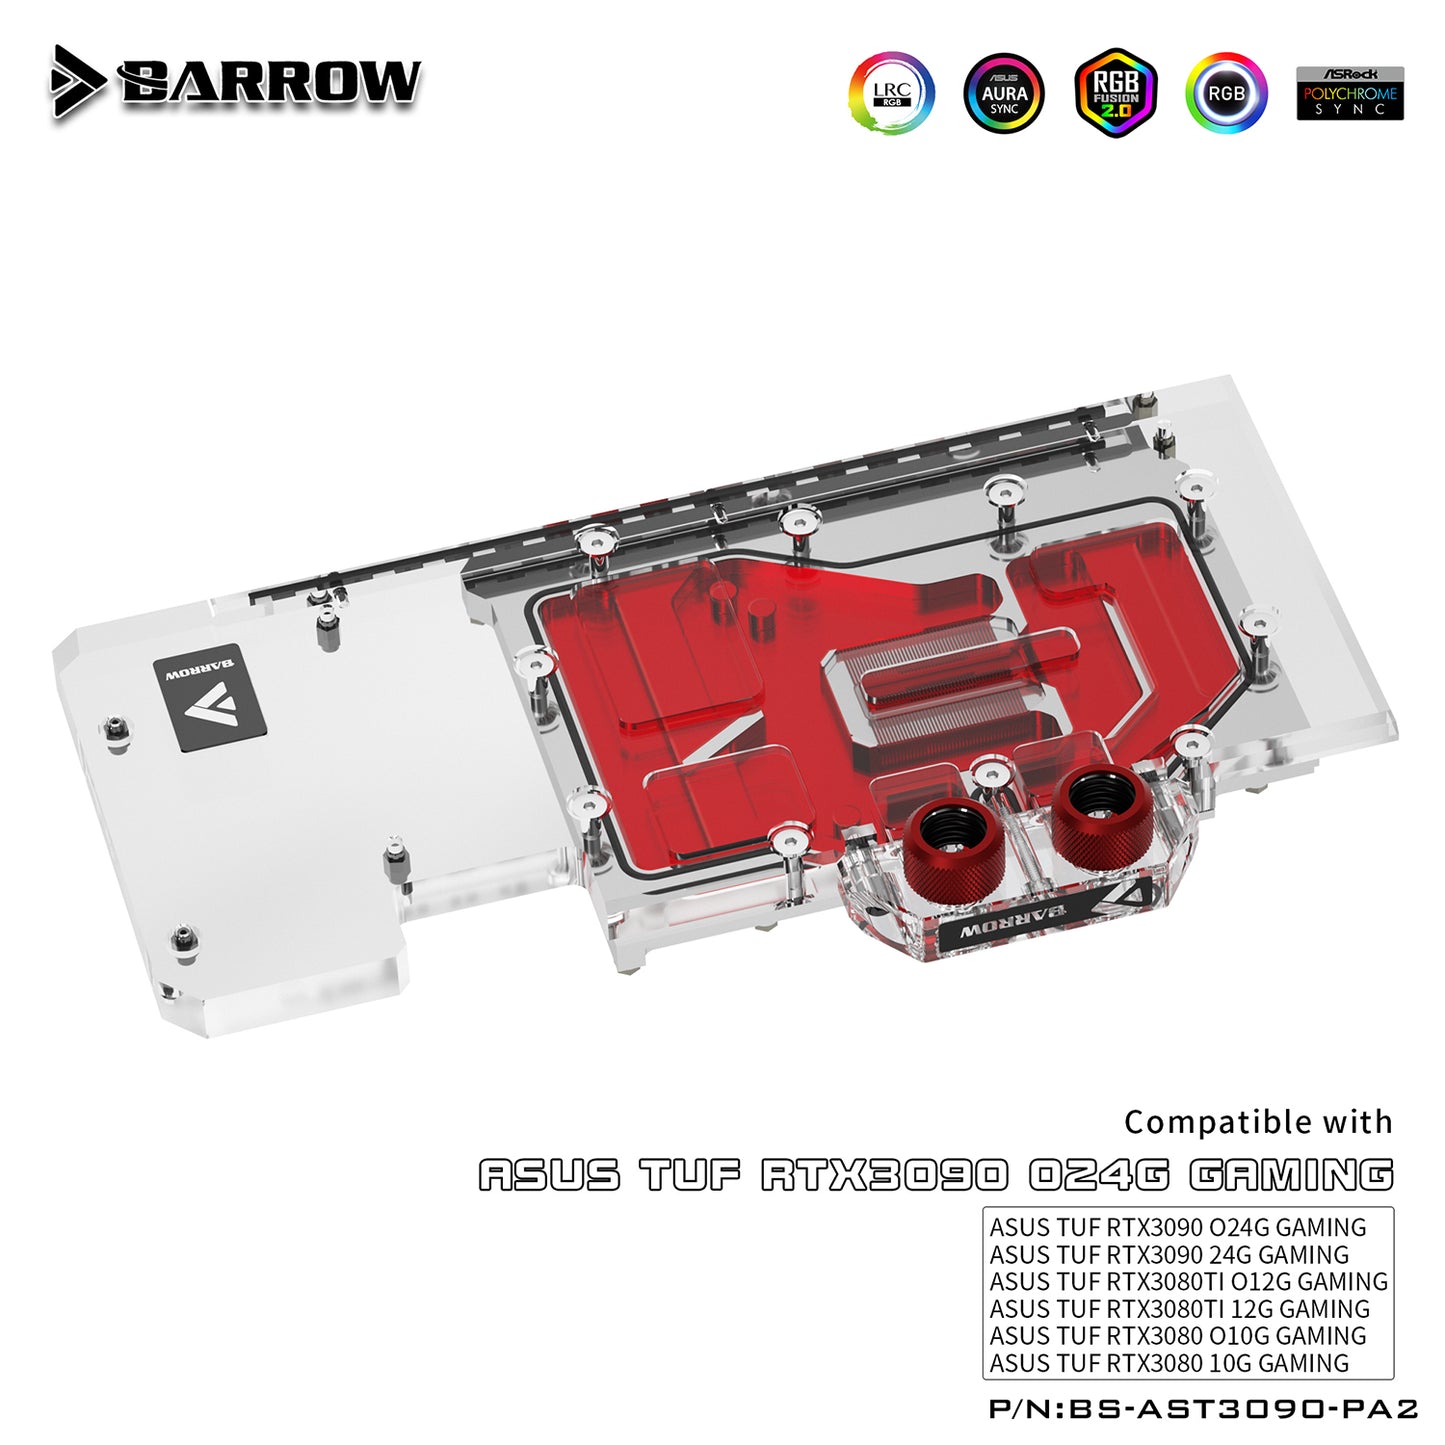 Barrow 3090 3080 Water Block Backplane Block For ASUS TUF 3090 3080 Gaming, All Around Cooler Backplate , BS-AST3090-PA2 B